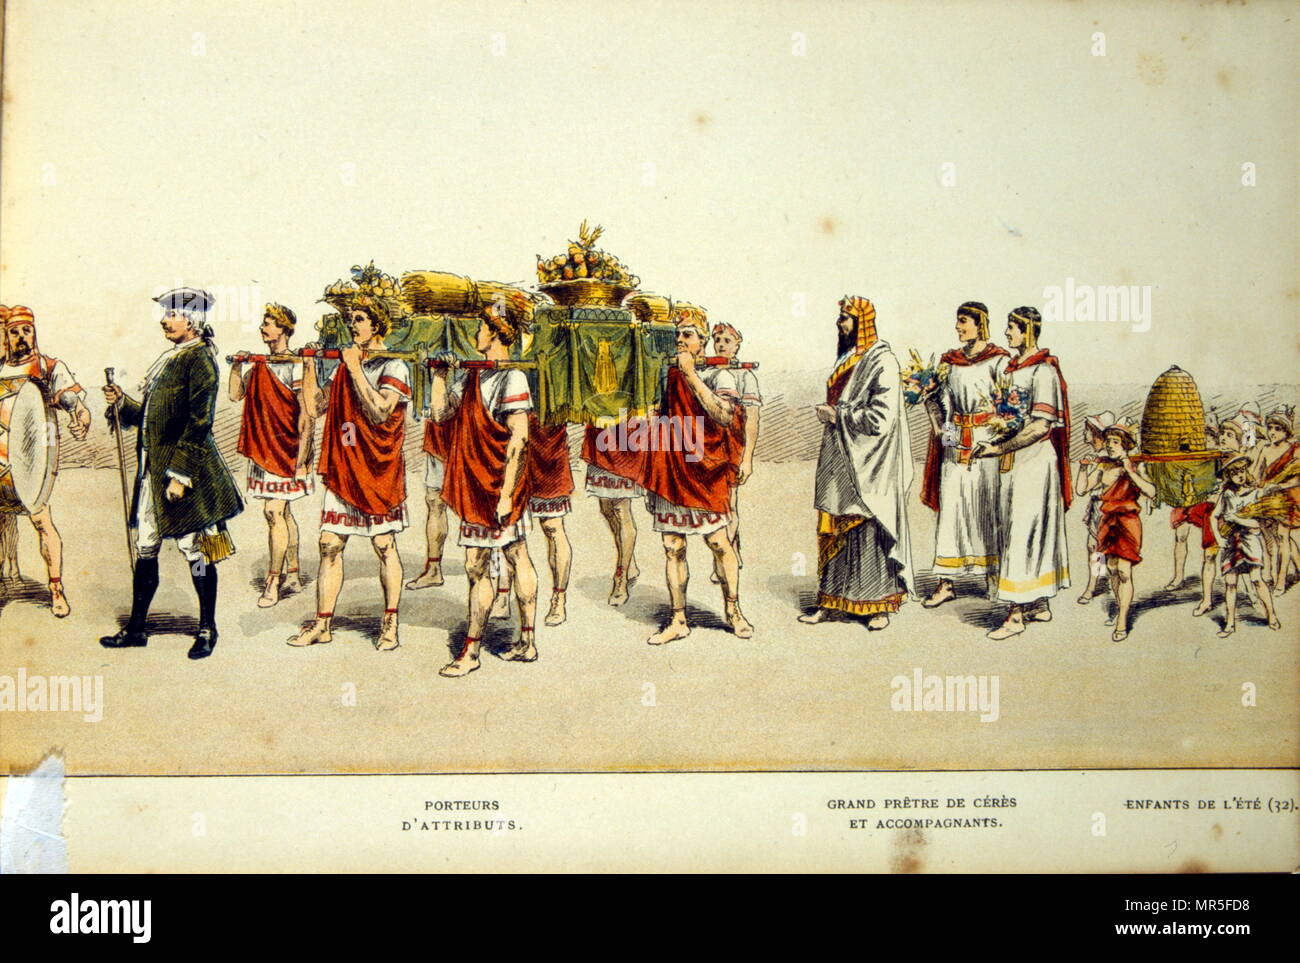 Illustration of the 1889, Fête des Vignerons (Winegrowers Festival). Traditional celebration held five times a century in Vevey, Switzerland. Organized by the Brotherhood of Winegrowers of Vevey since 1797. The committee's free to choose the time intervals between parties, maximum being five times per century. Until now, the interval between two parties has varied between 14 and 28 years. The next edition will take place in 2019, 20 years after the previous one (1999). The show pays tribute to the world of wine, several performances take place on the Market Square along Lake Geneva's shores. Stock Photo